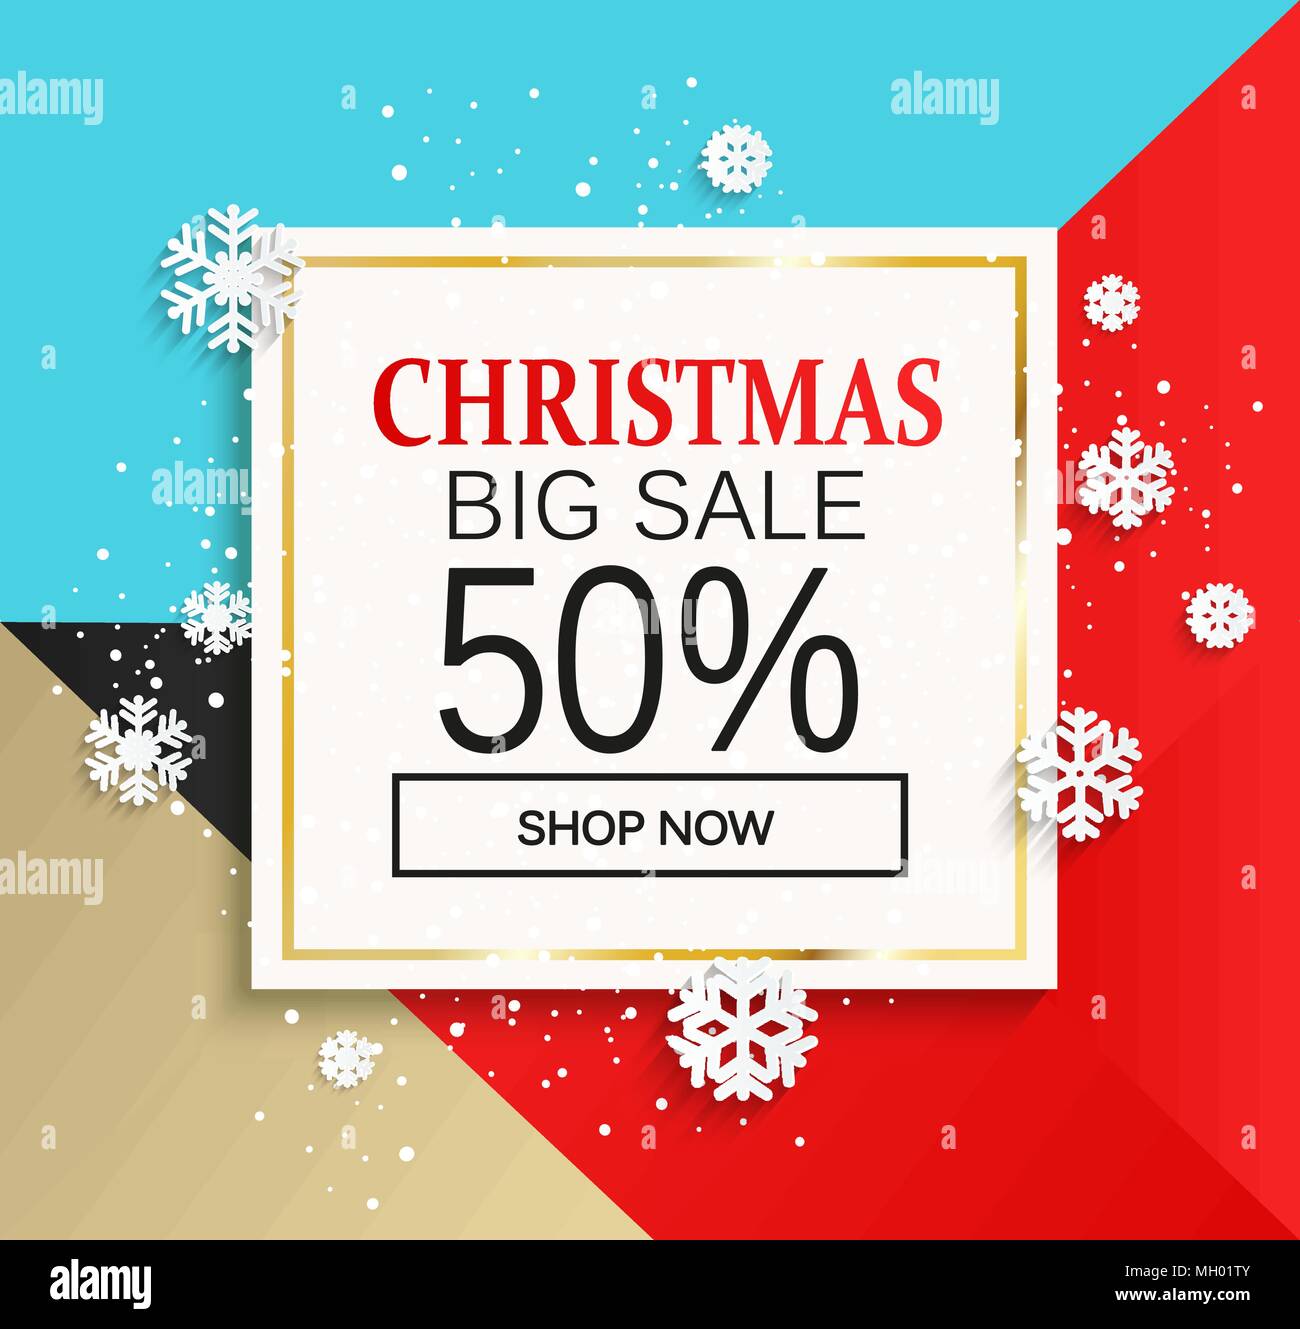 Christmas big sale banner. Card for shop now on colorful geometric background with snowflakes. Vector illustrations. Stock Vector